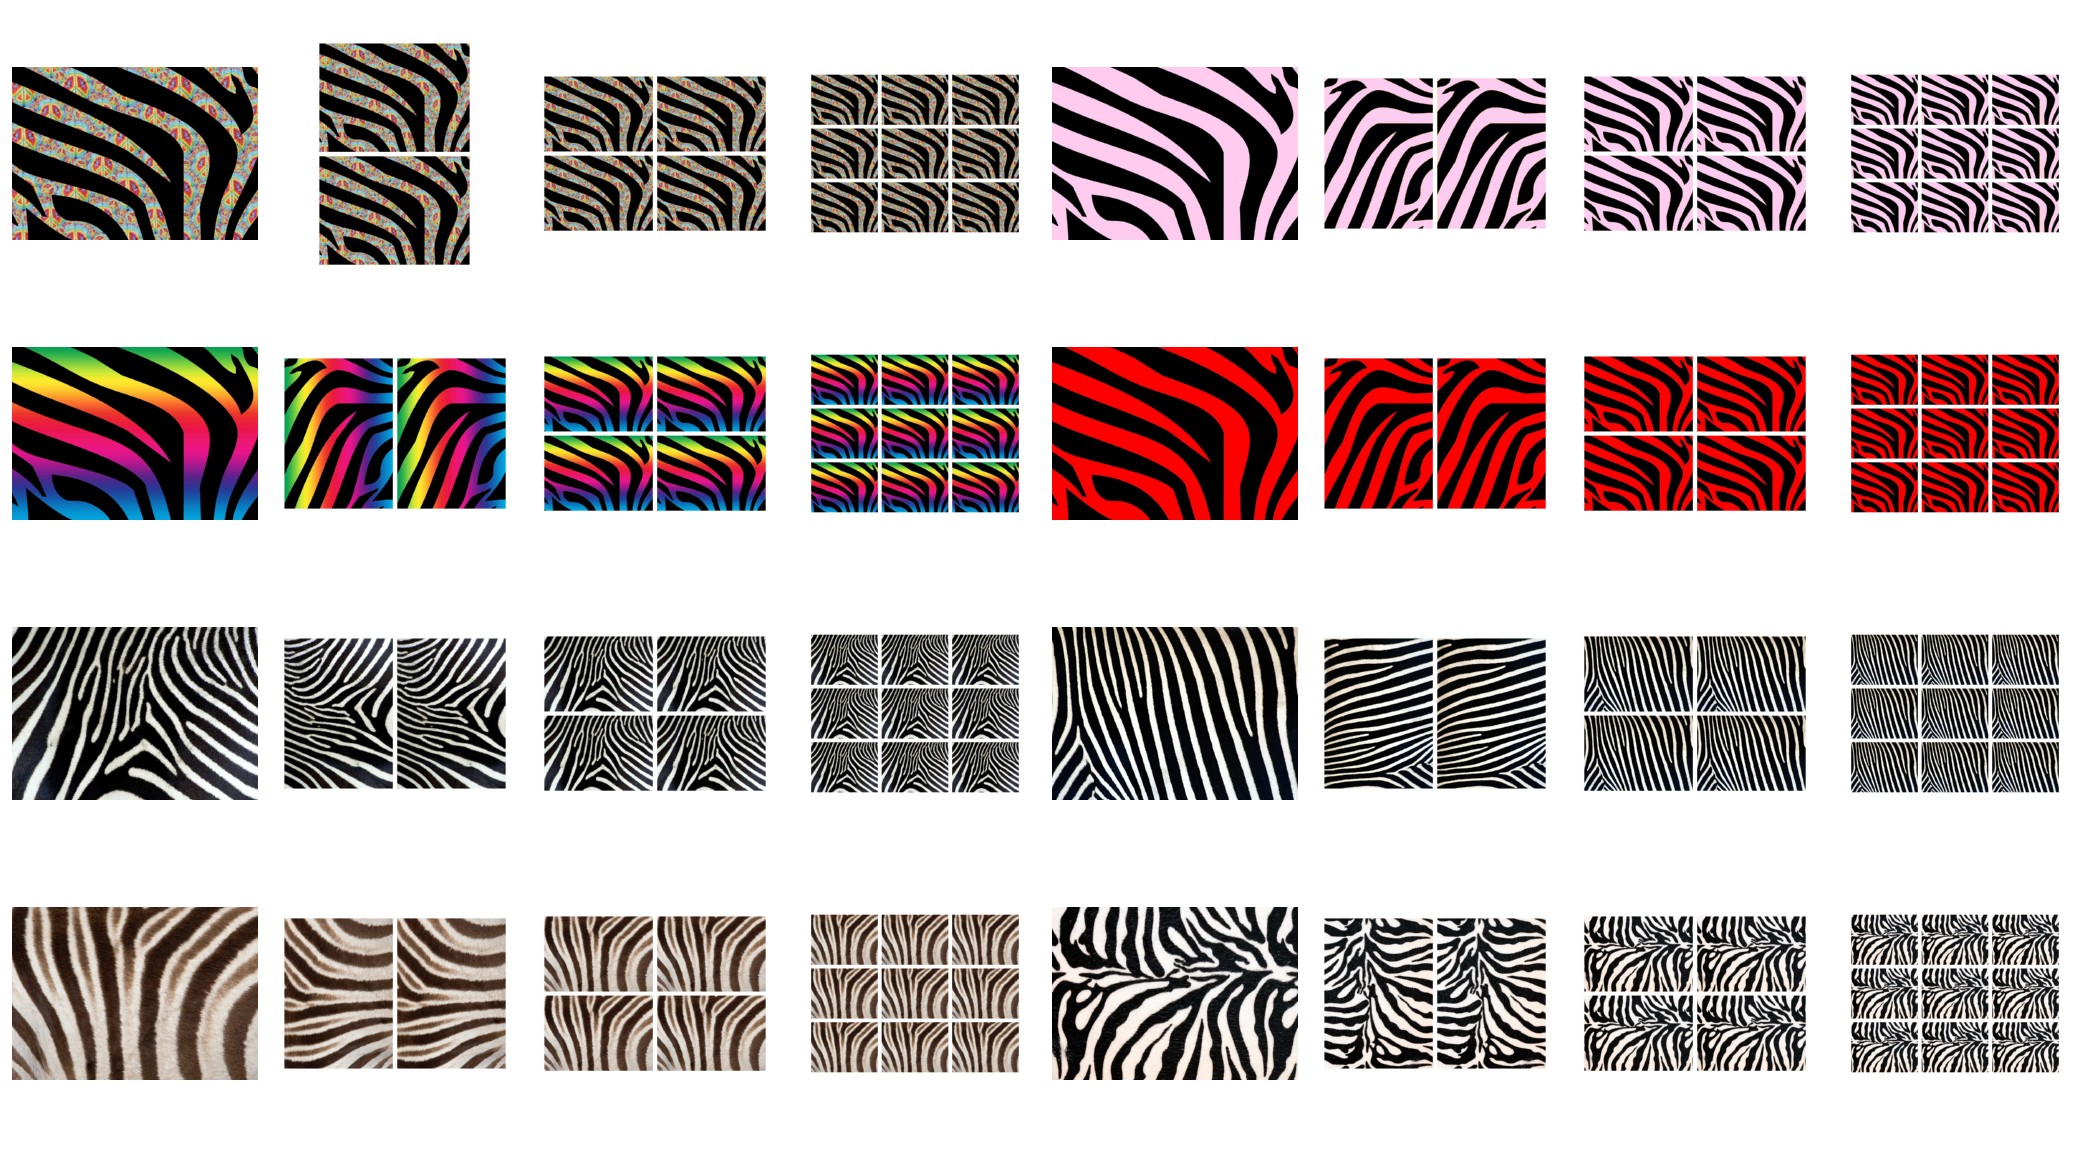 <b>.Zebra Print - ALL 8 SETS - 32 Pages to DOWNLOAD